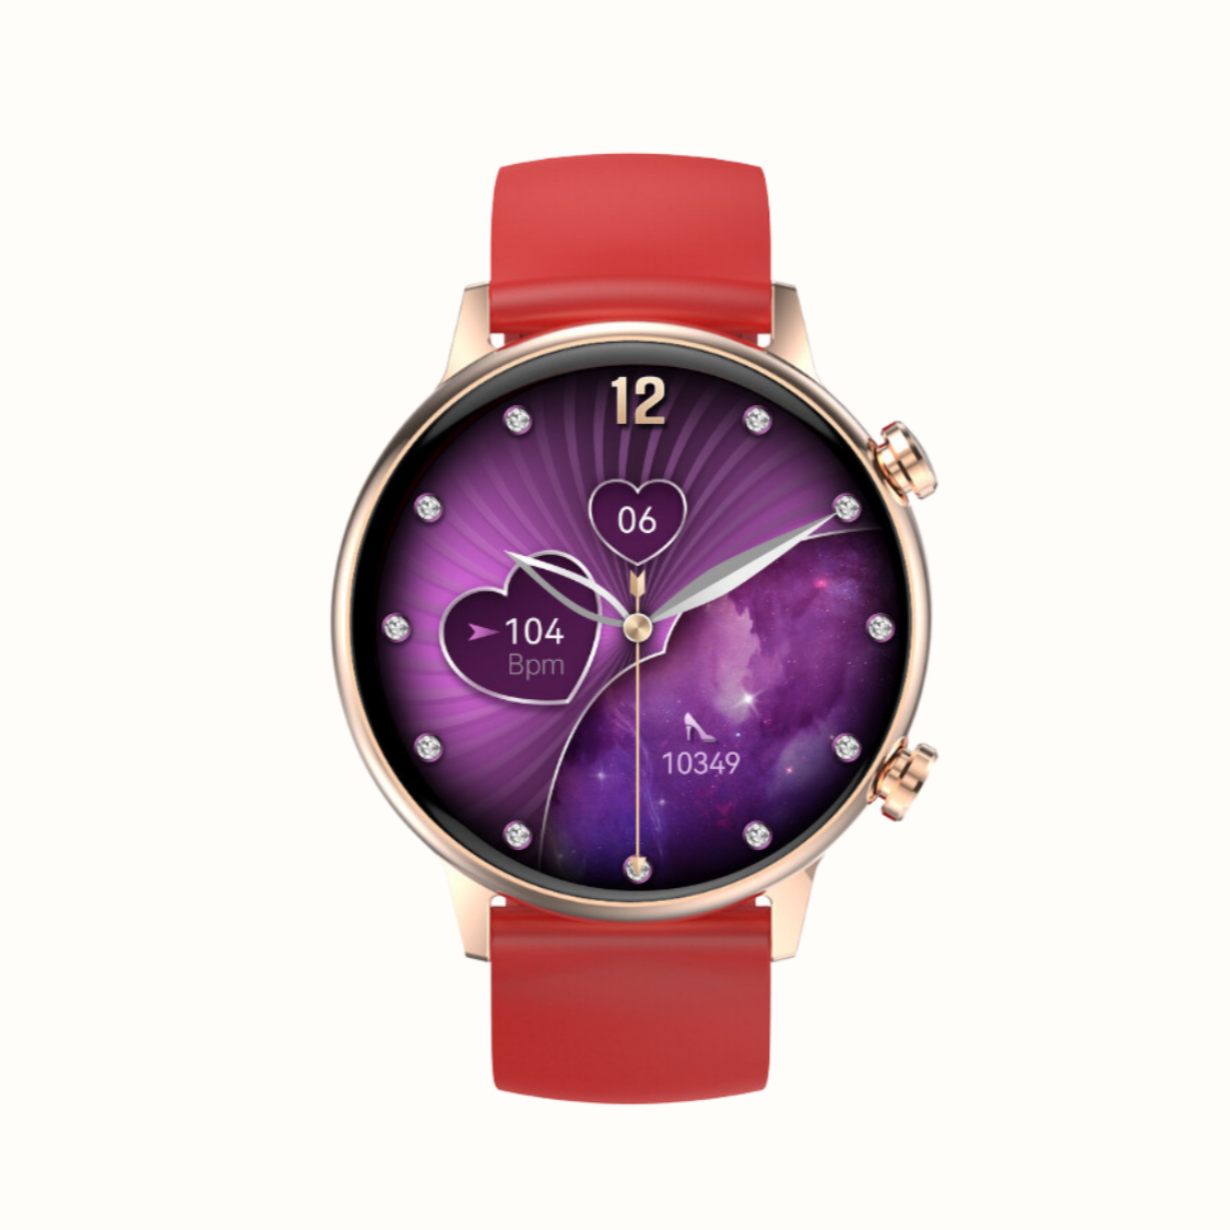 HK39 Women Smartwatch, AMOLED Display, Setup with Android device, Setup with Apple Device, Water resistance - IP68, Best Smart Watch, 2023, Track Activity,Track WOmens Health, Pedometer, Calorie Monitor, Sleep Tracking, Heart Rate Monitor, Blood Oxygen Monitor- Spo2, Multisport Mode, Color - Red